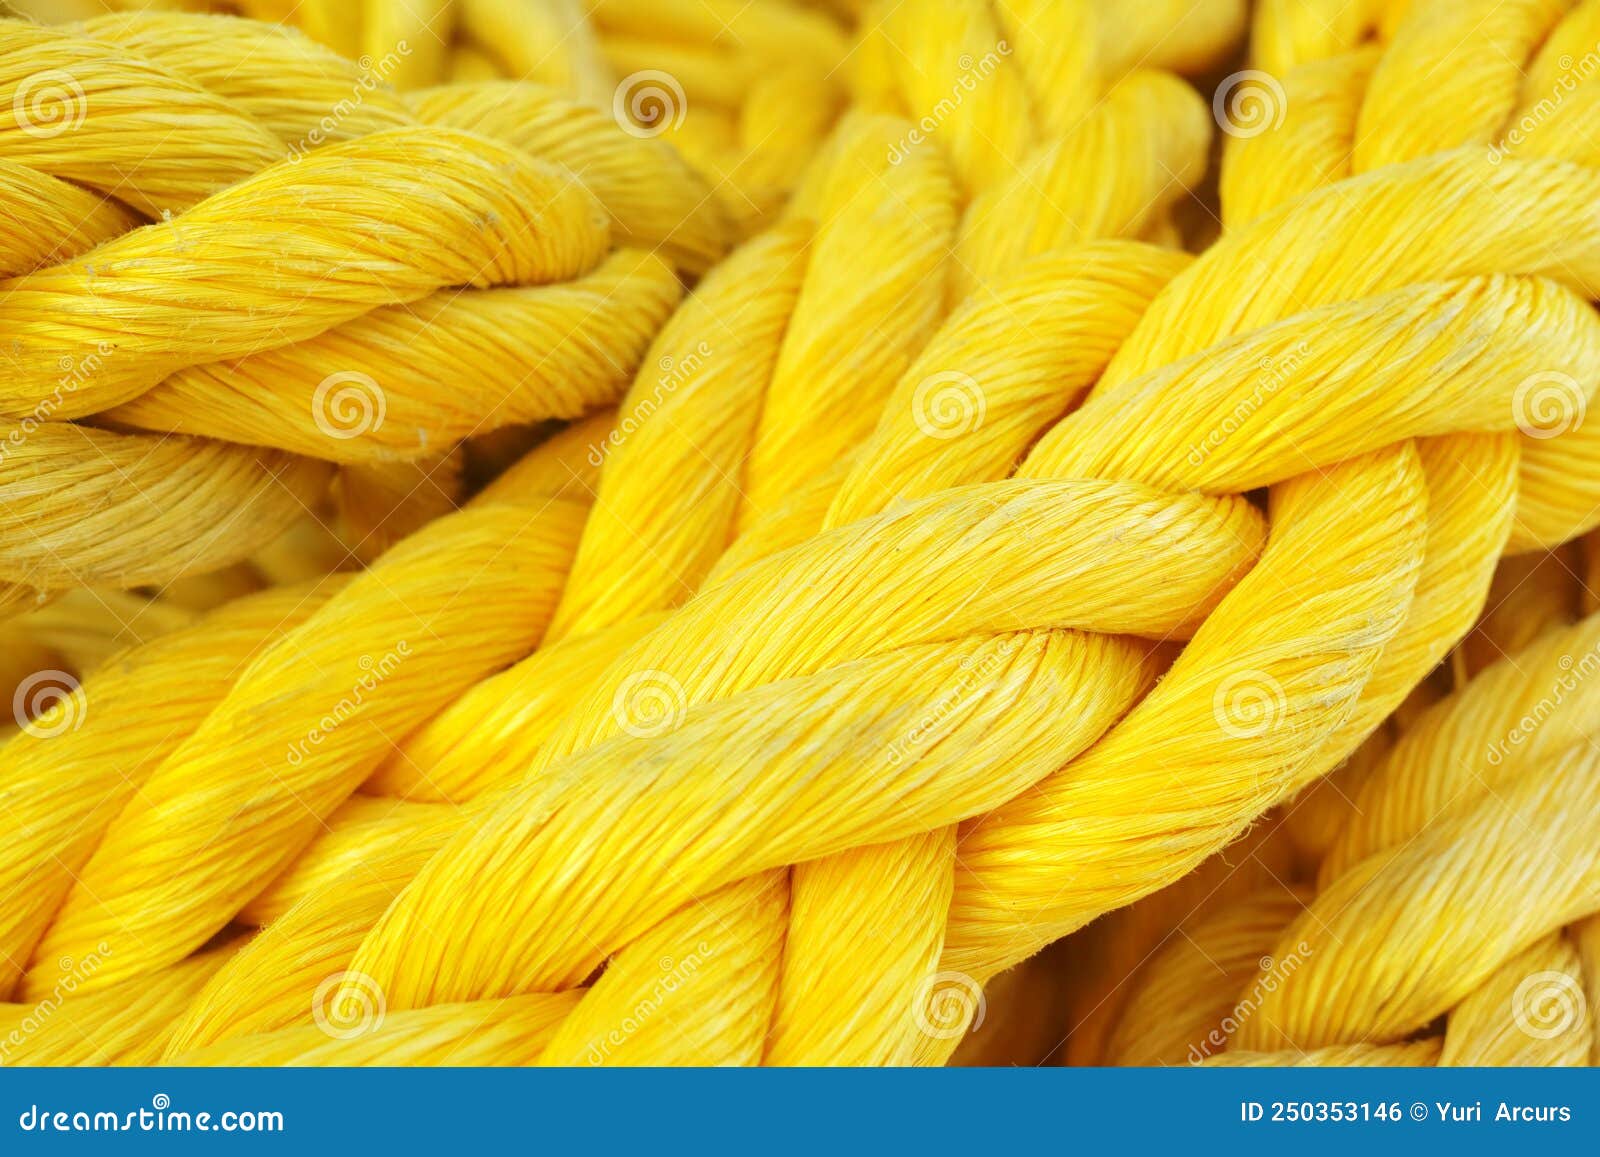 Closeup of a Strong and Colorful Yellow Rope. New Heavy Duty